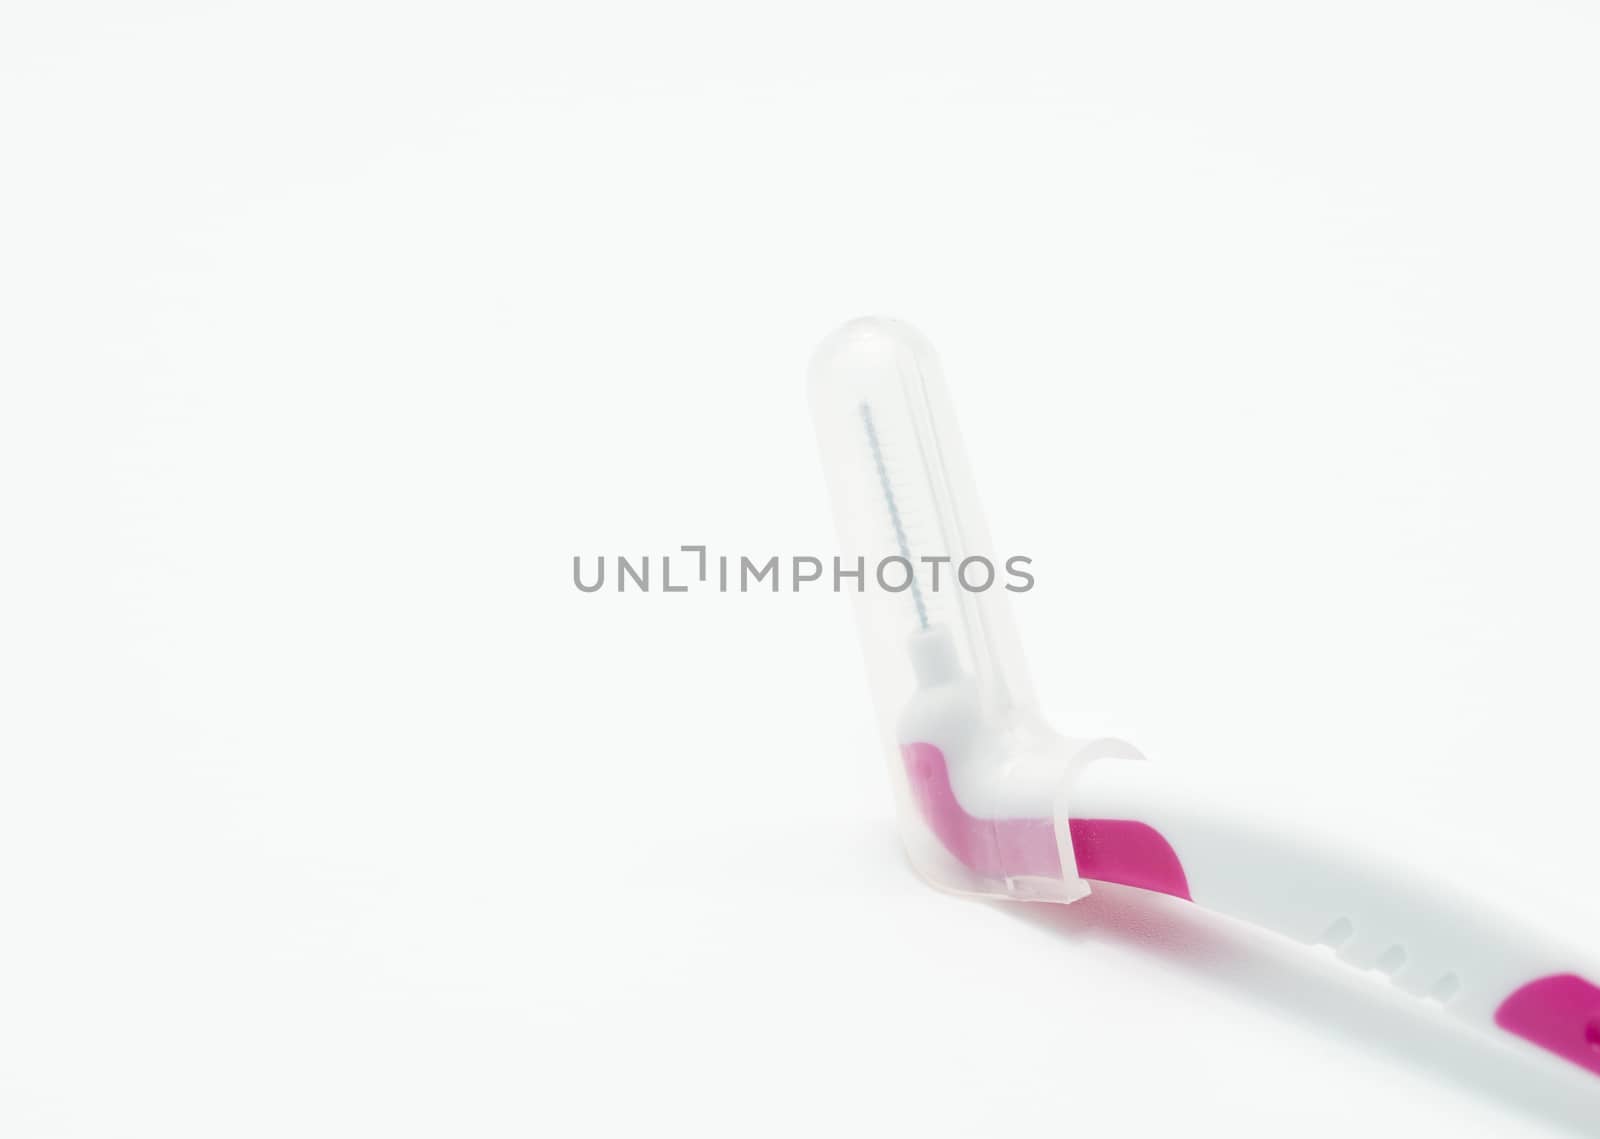 Interdental brush with cover isolated on white background by Fahroni